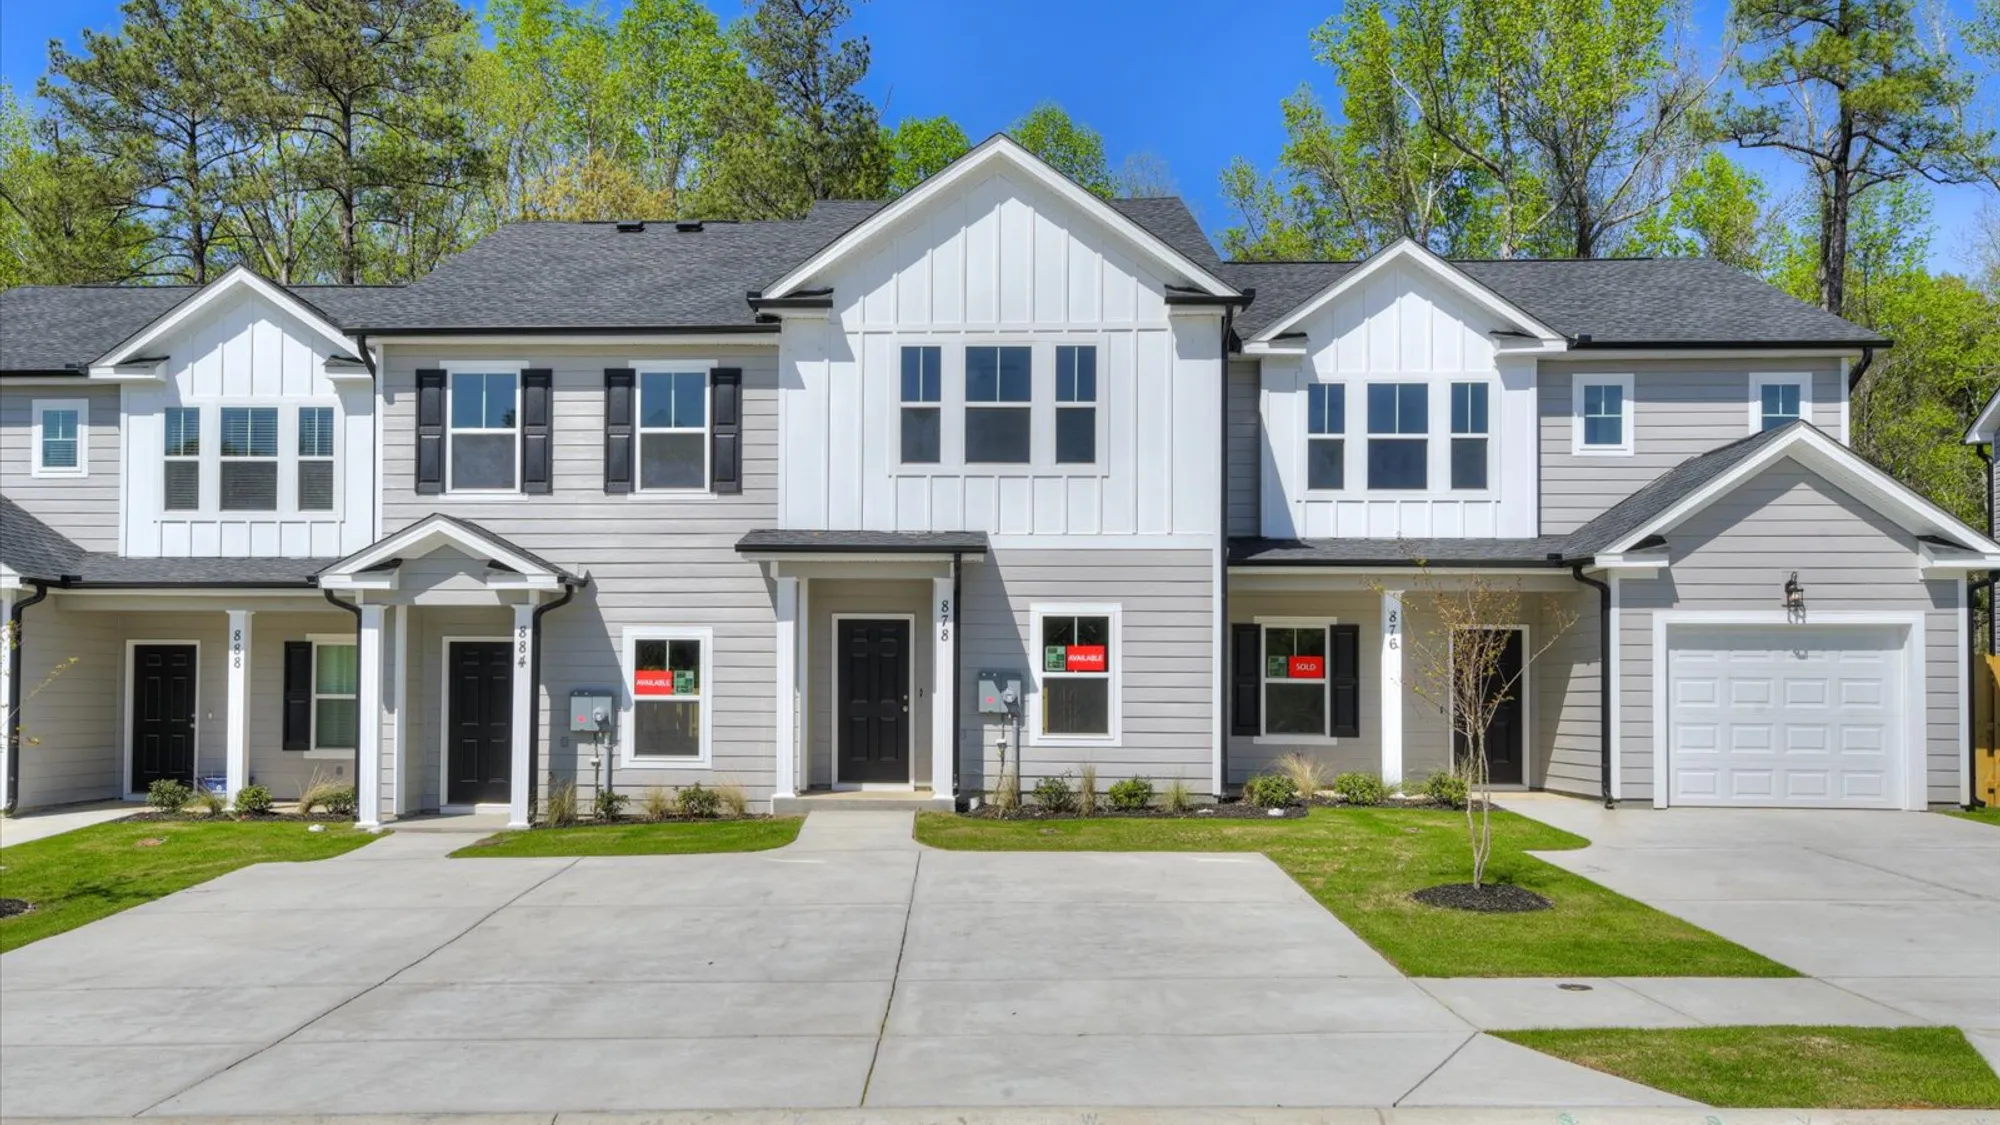 Exterior view of a newly constructed townhome by Ivey Homes at 878 Rachel Branch Forrest Bluff, showcasing the modern design with a backdrop of lush trees in North Augusta, SC.